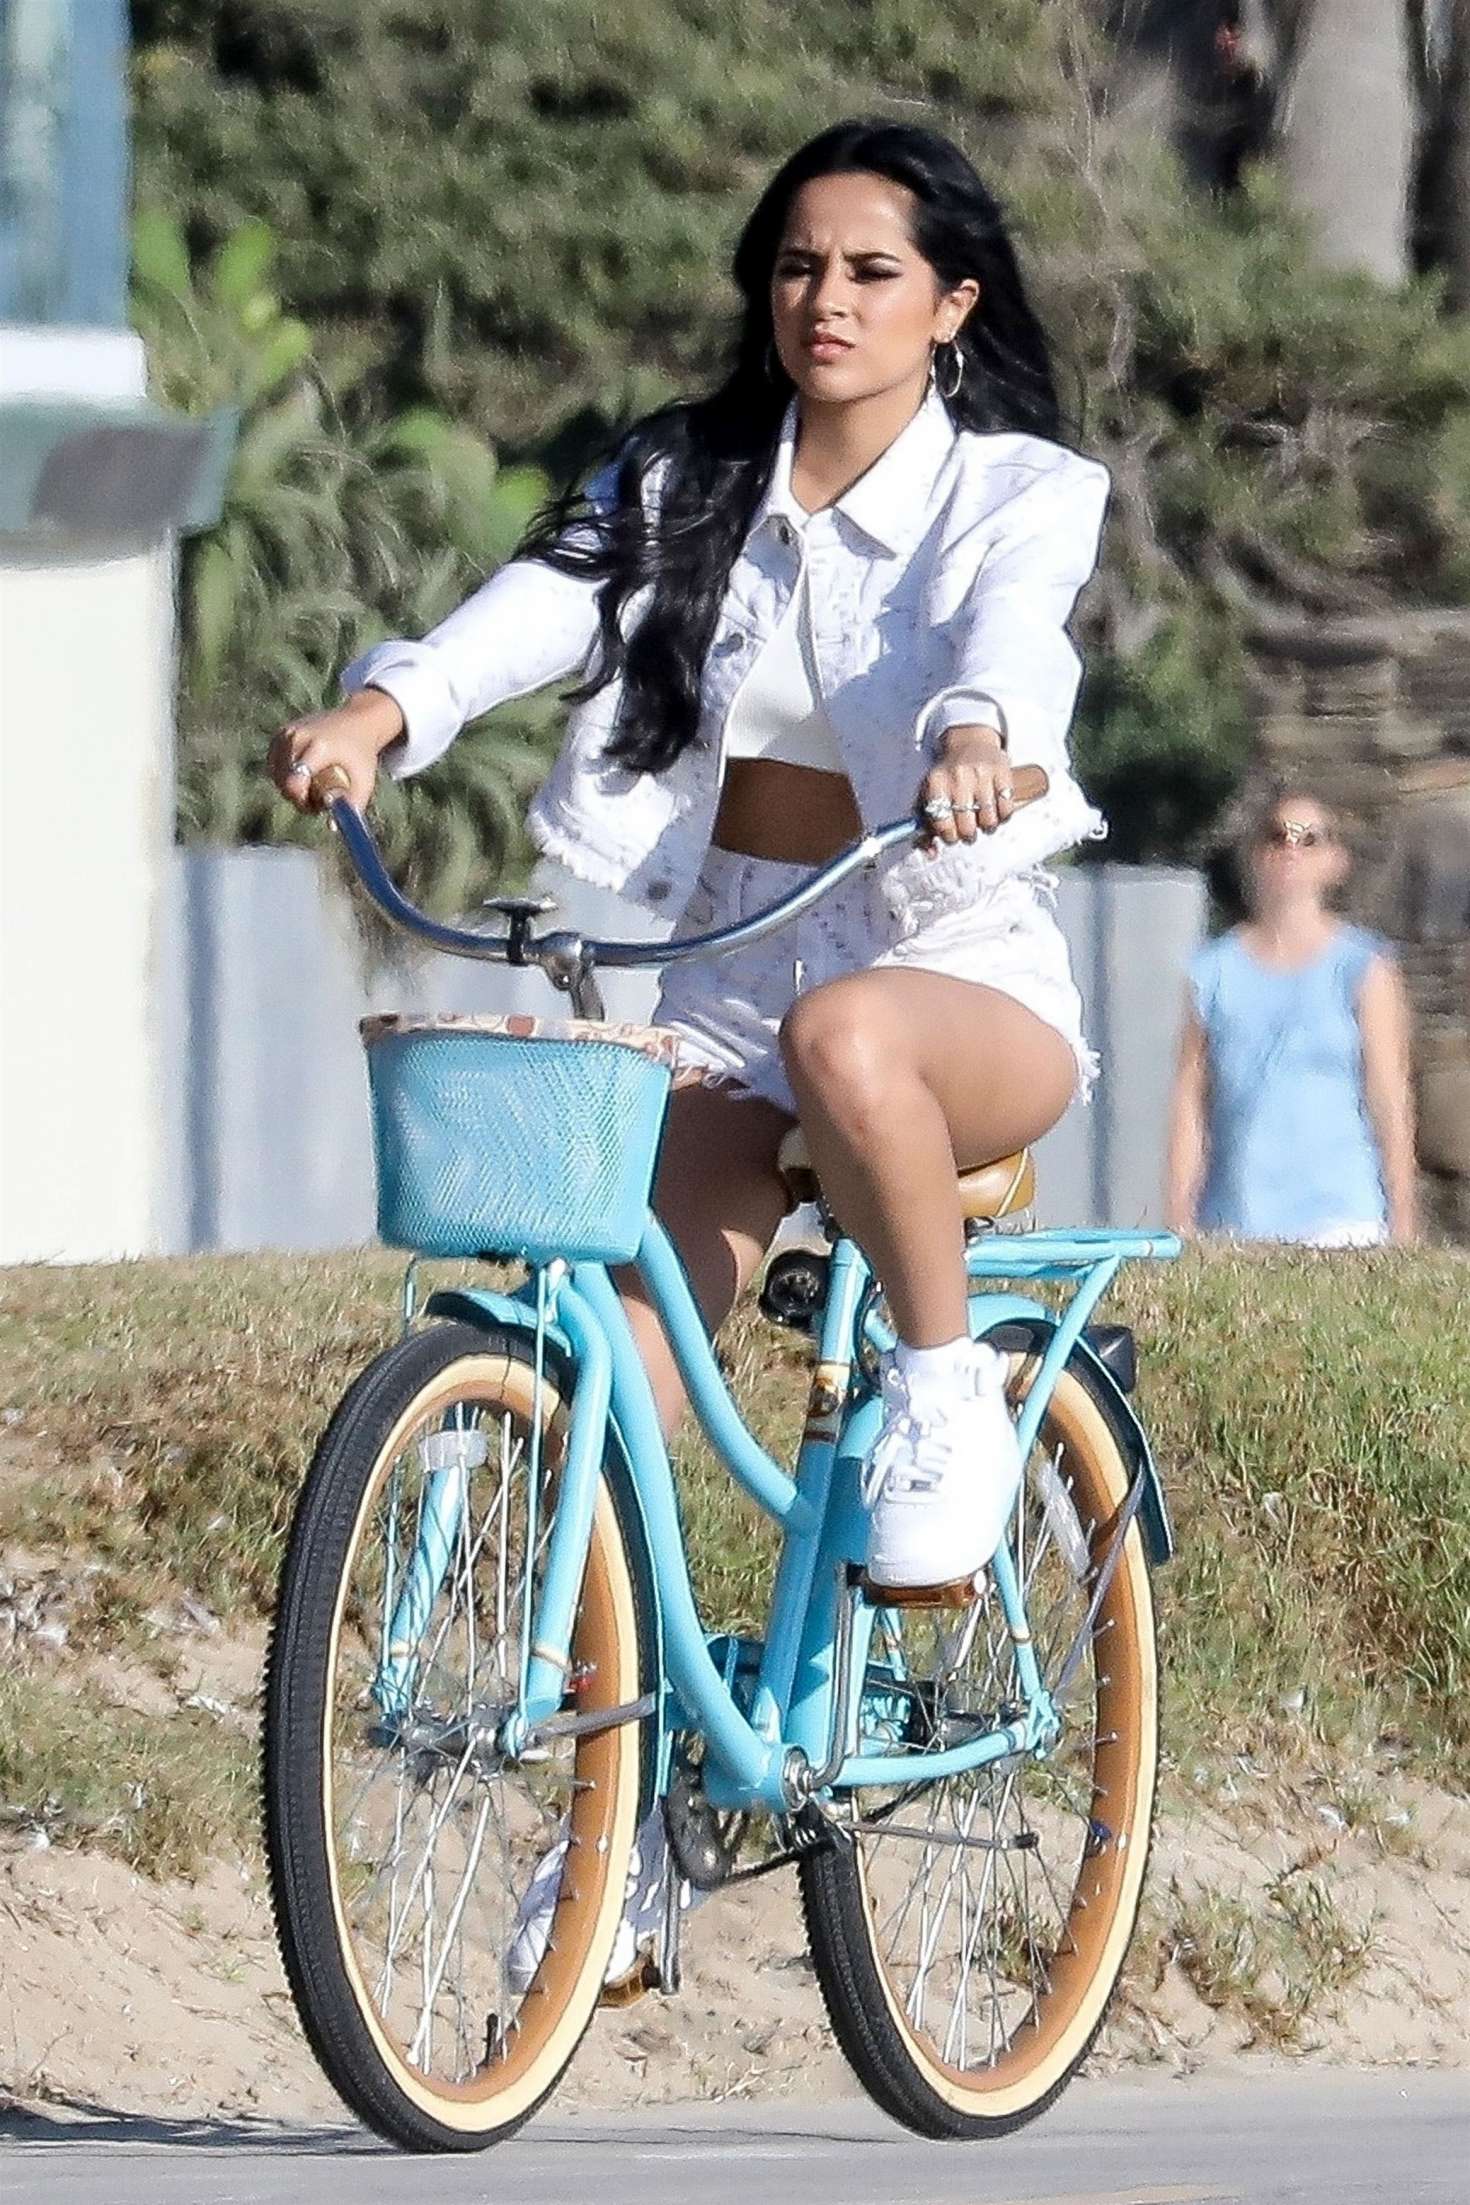 Becky G â€“ Filming a bike ride scene for an upcoming music video in Venice Beach